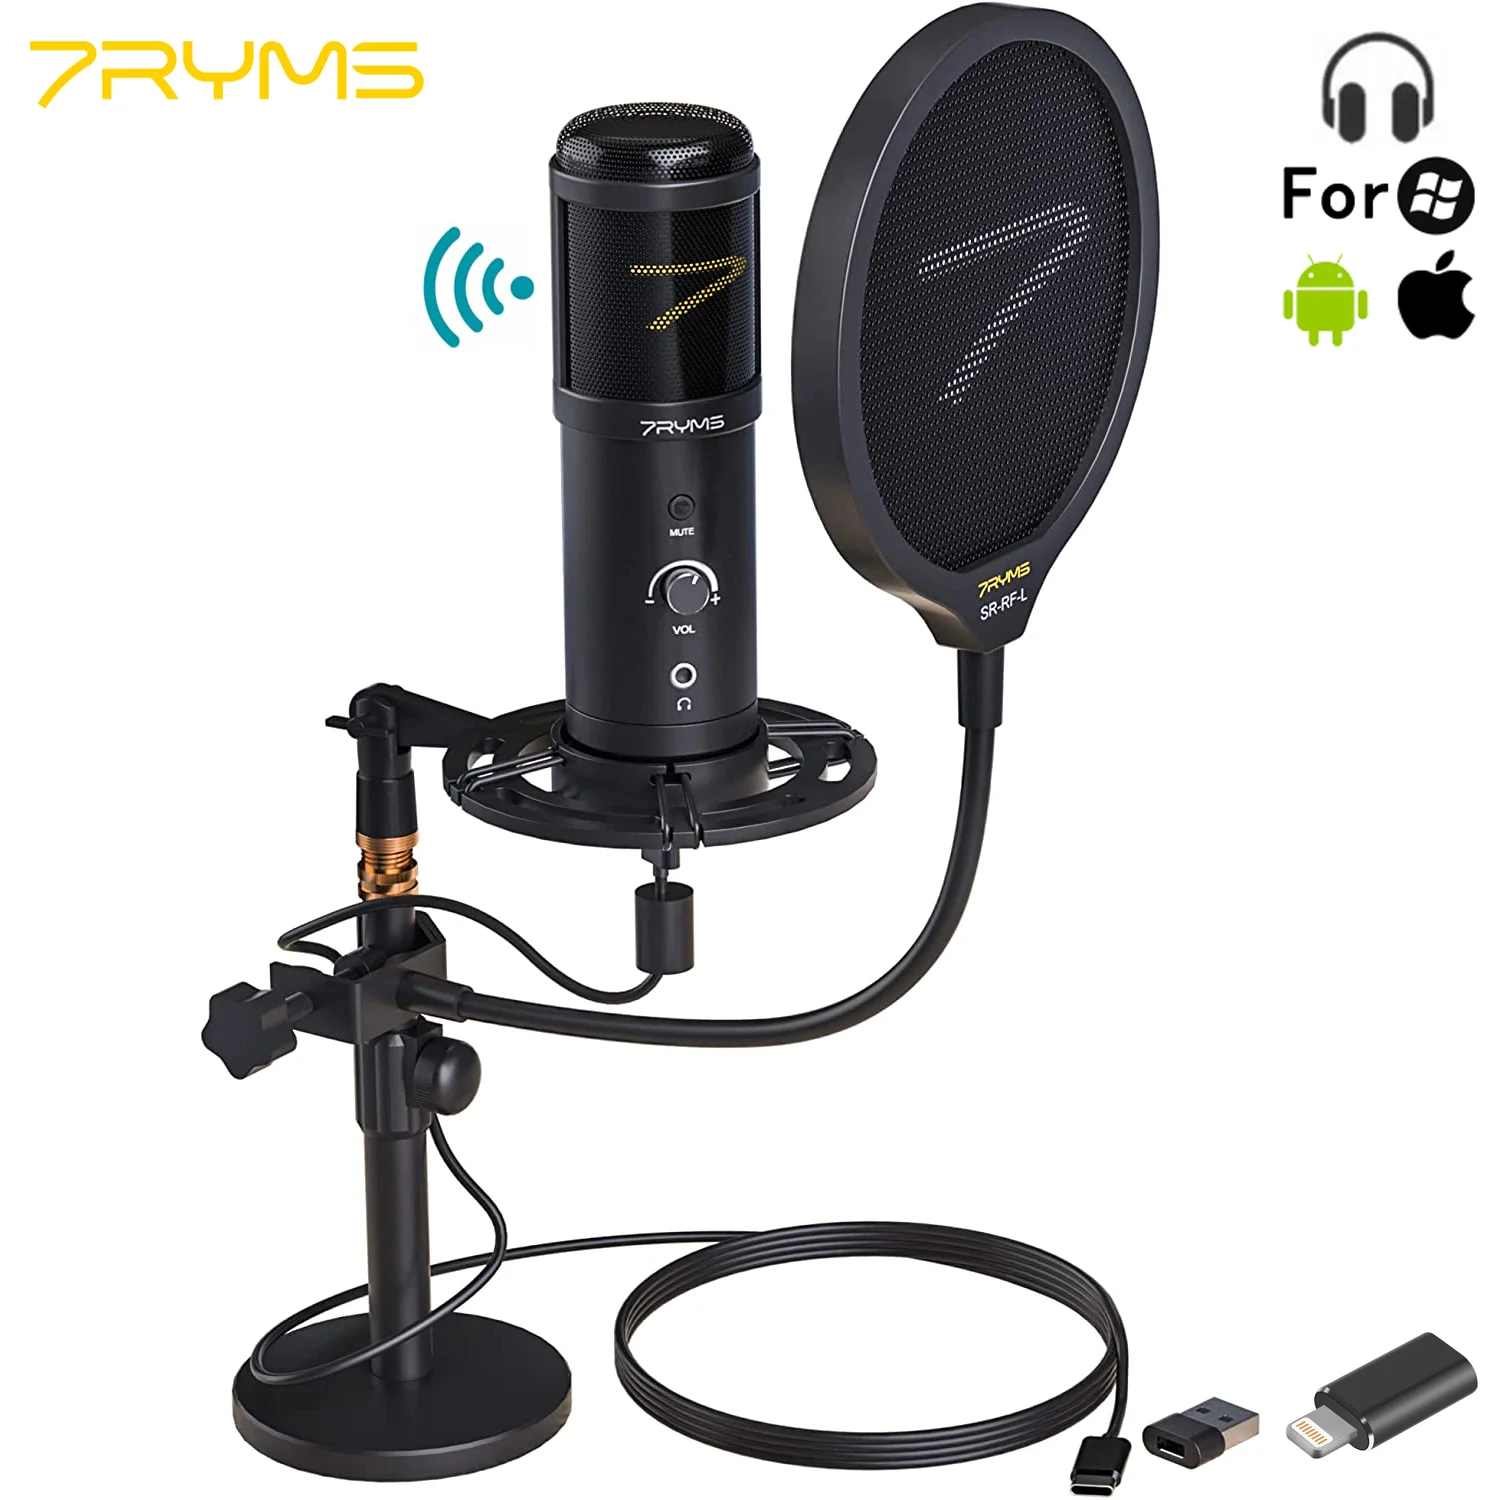 7RYMS Condenser USB Microphone SR-AU01-K2 PC Microphone Kit with Shock Mount and Real-time Monitor for Podcast Live Streaming